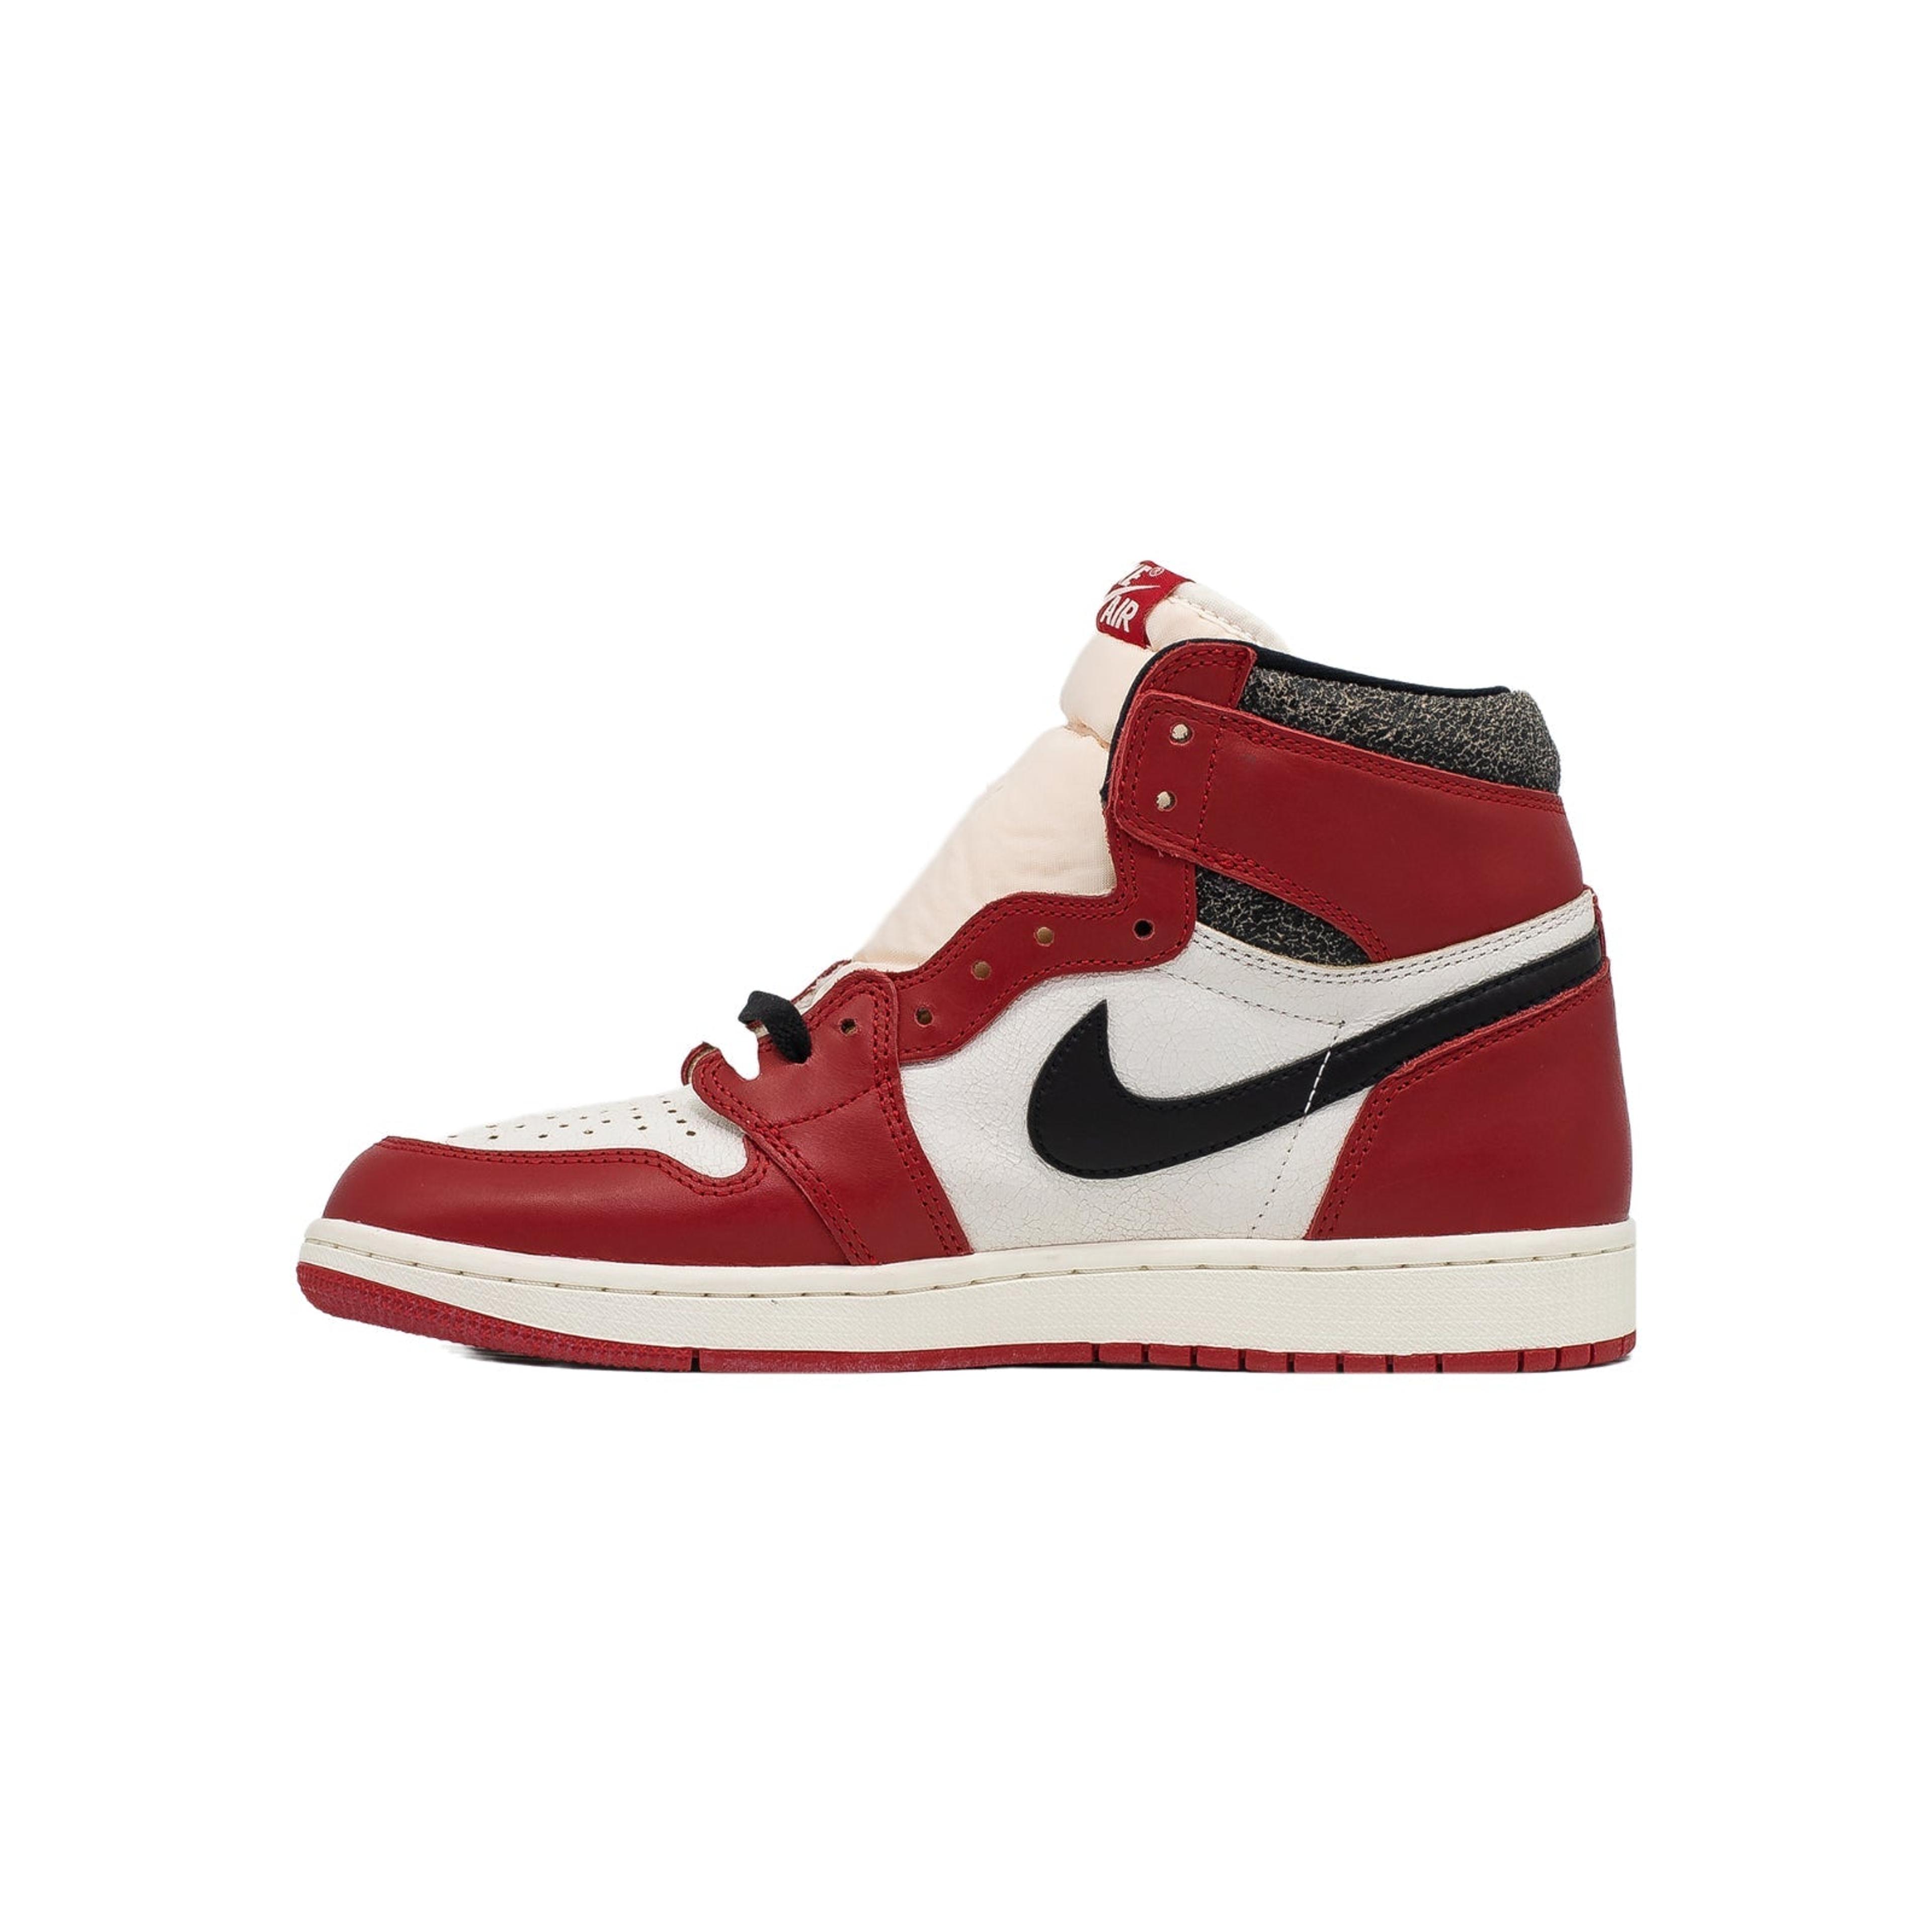 Alternate View 1 of Air Jordan 1 High, Chicago Lost and Found